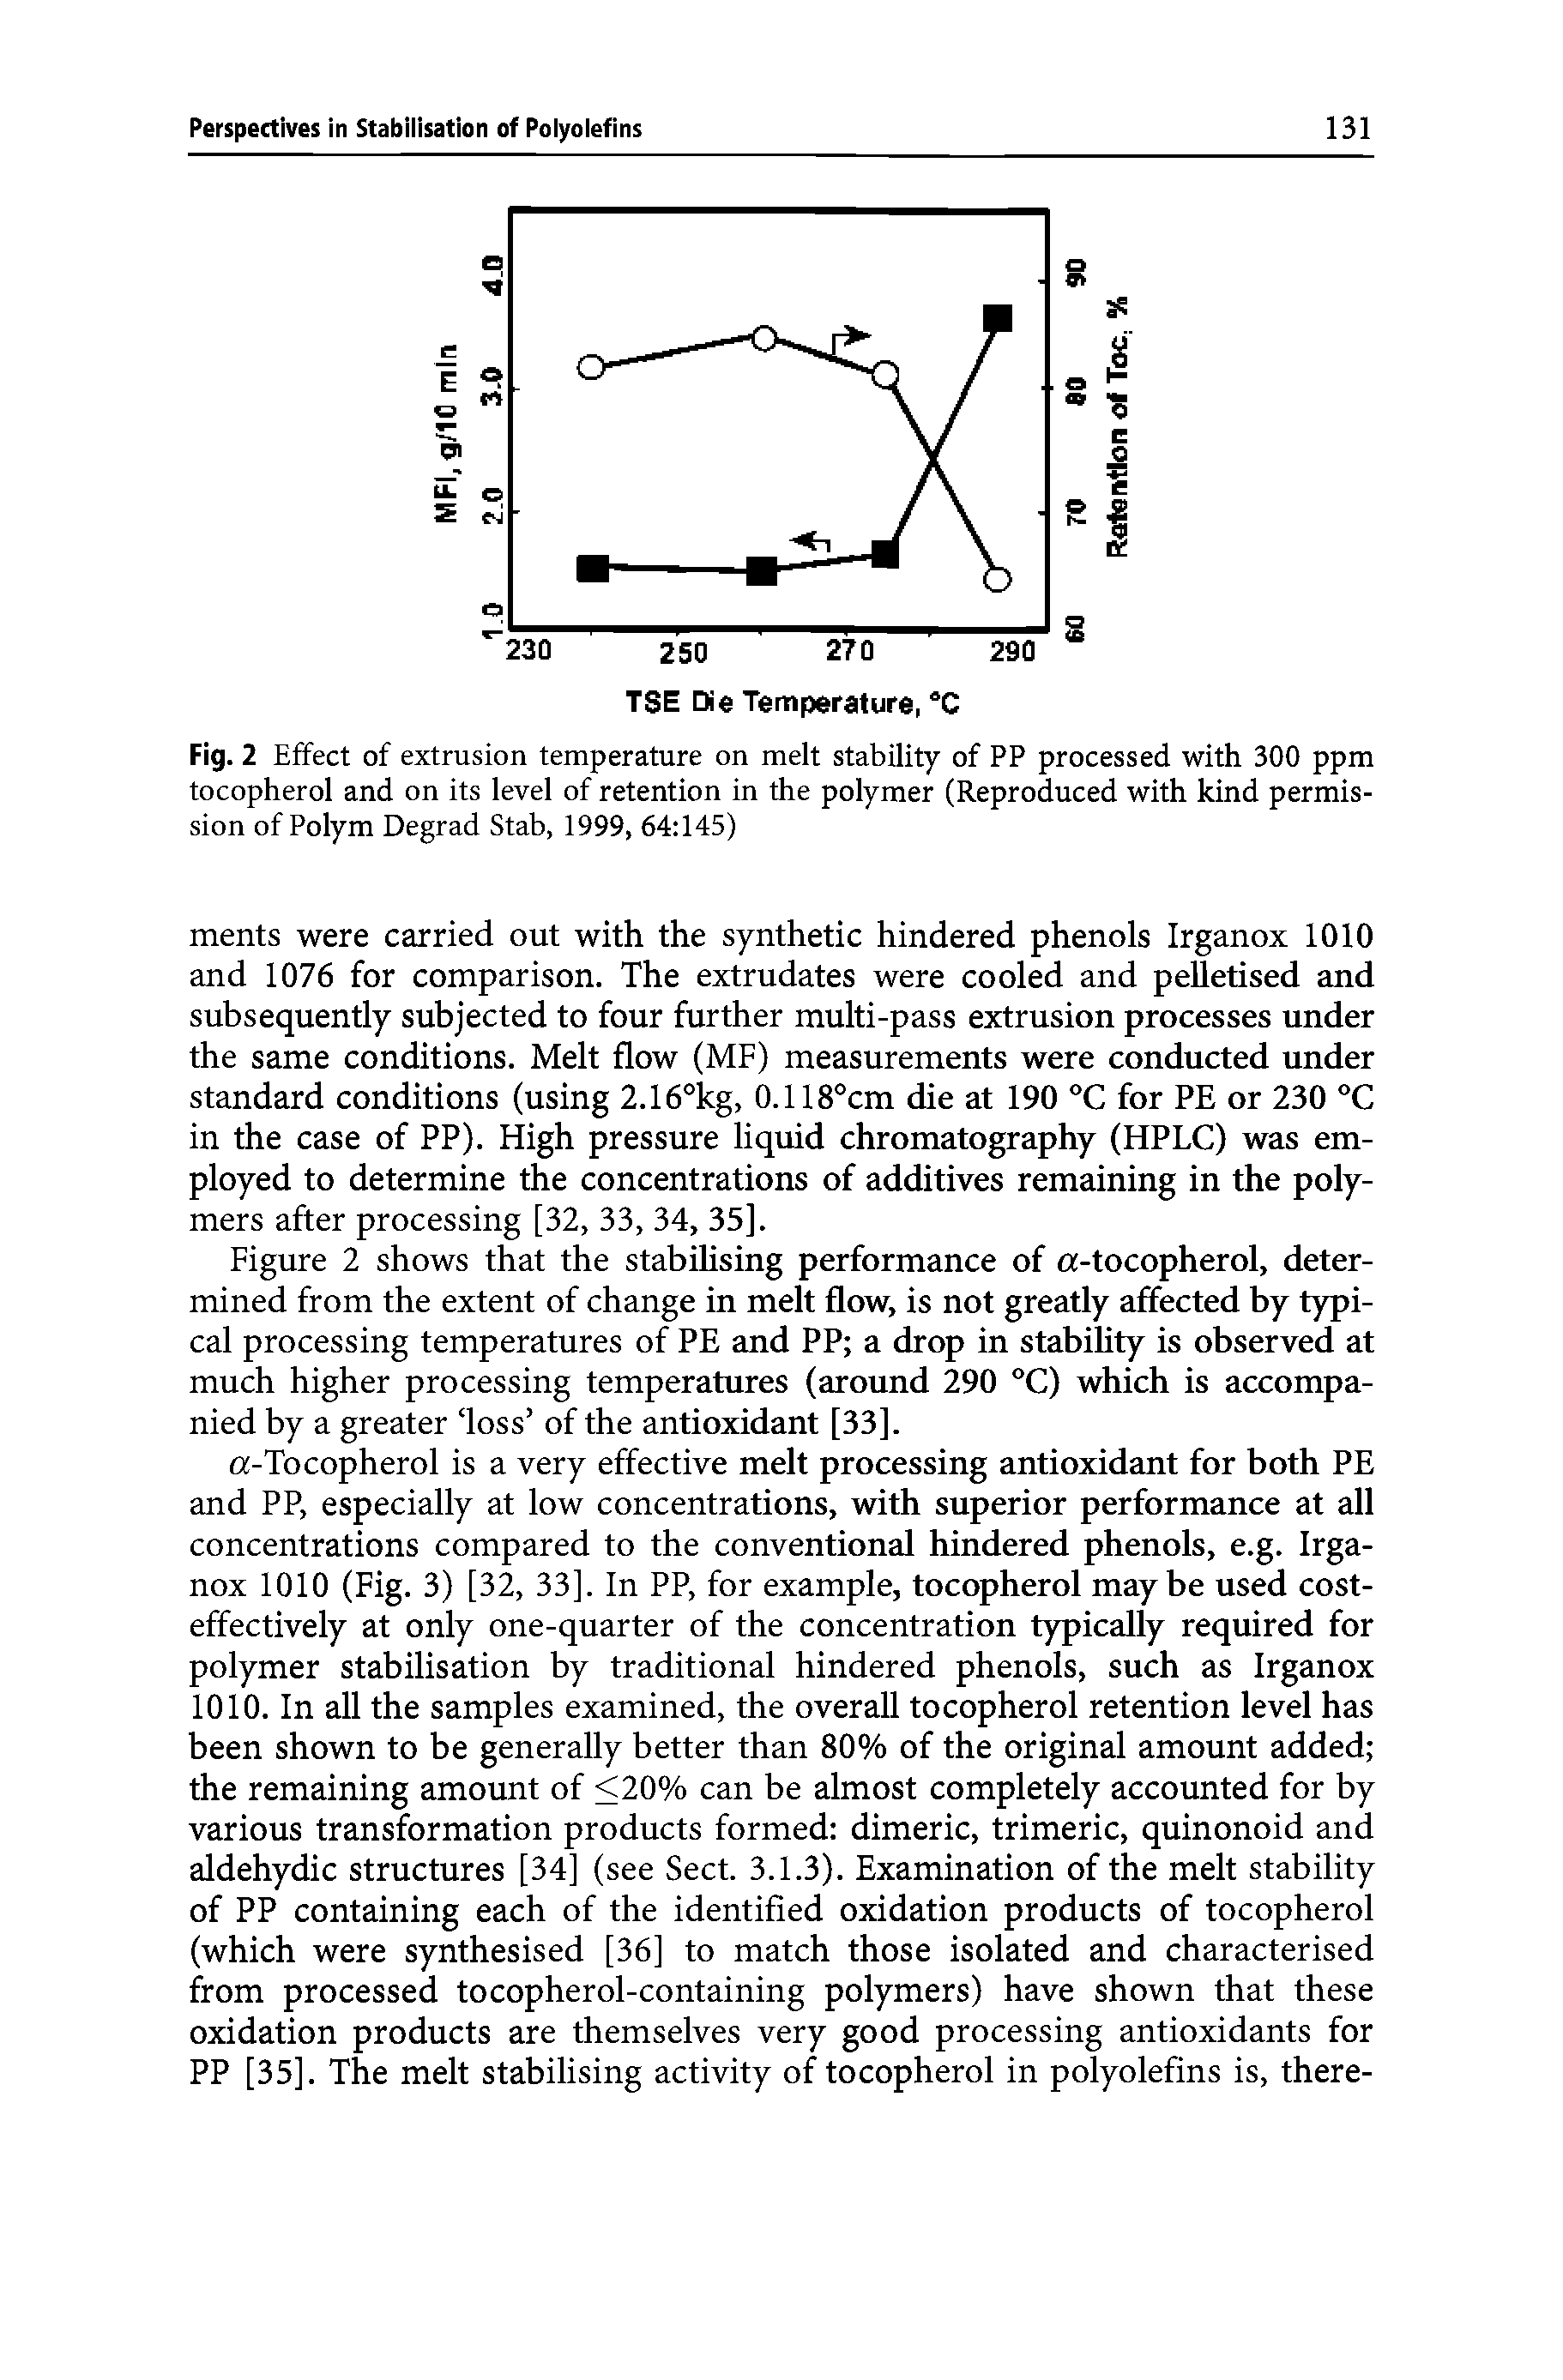 Fig. 2 Effect of extrusion temperature on melt stability of PP processed with 300 ppm tocopherol and on its level of retention in the polymer (Reproduced with kind permission of Polym Degrad Stab, 1999, 64 145)...